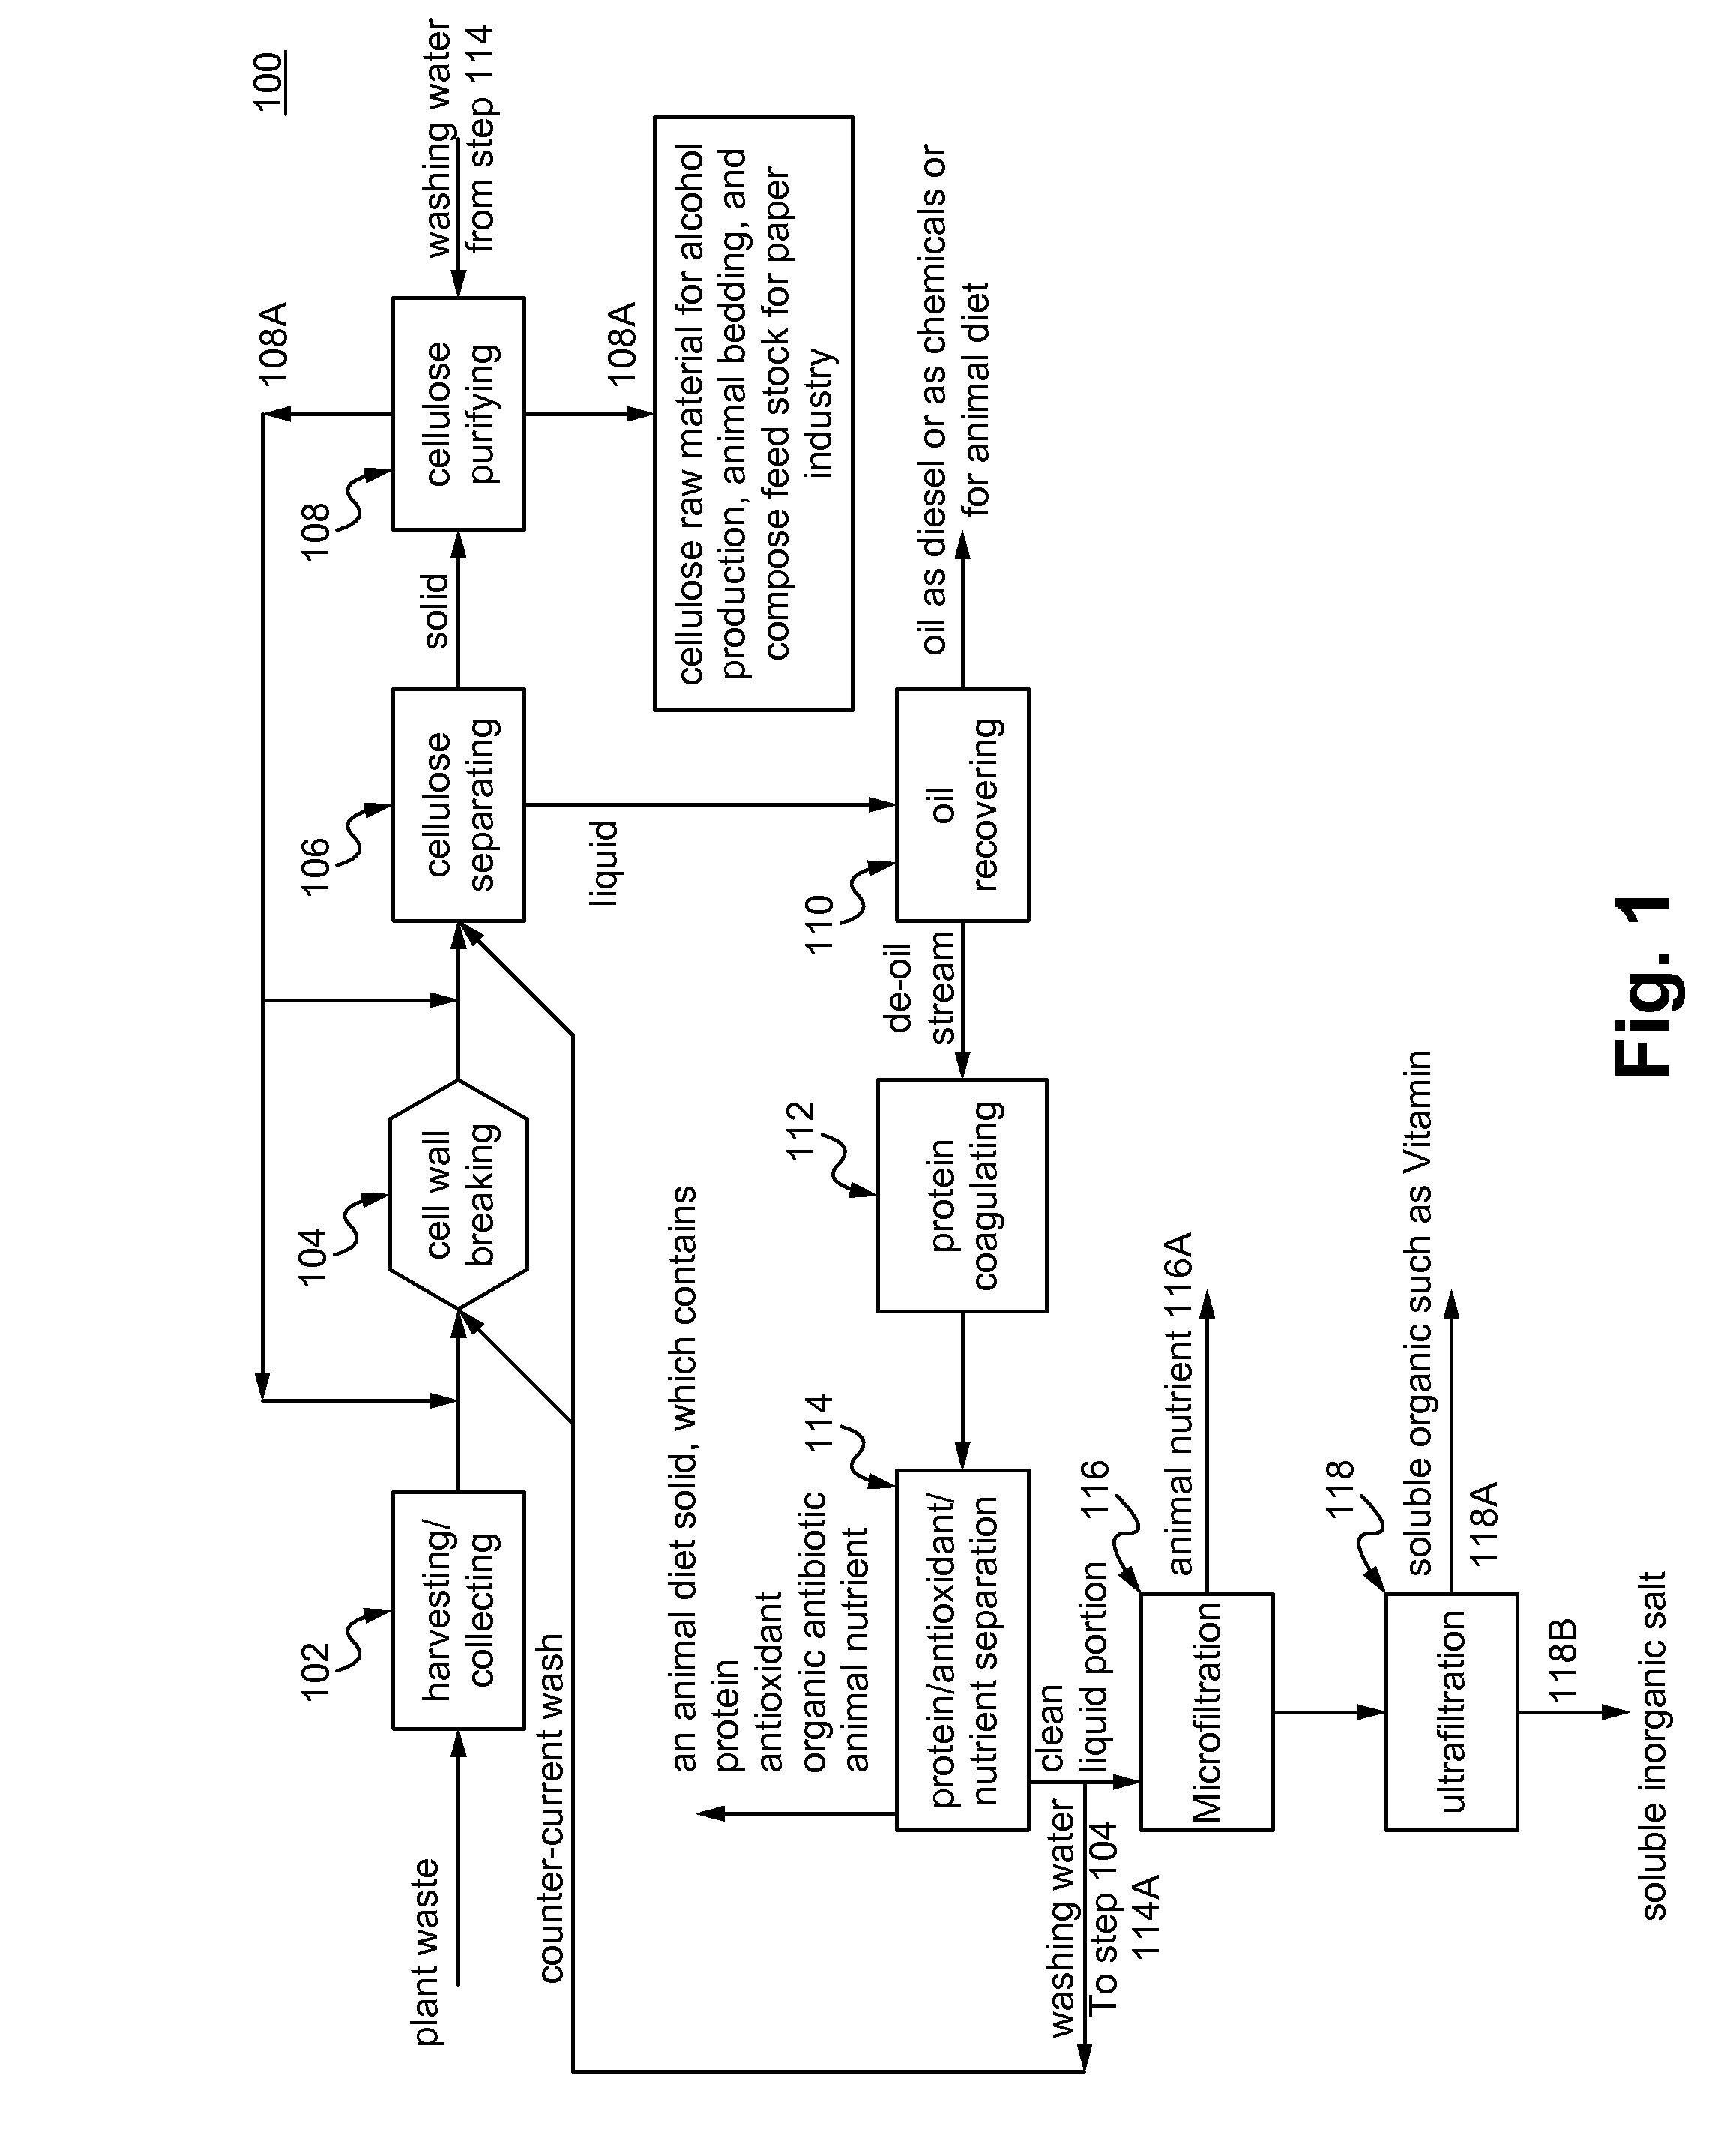 System for and method of converting agricultural waste to animal feed and other valuable raw materials